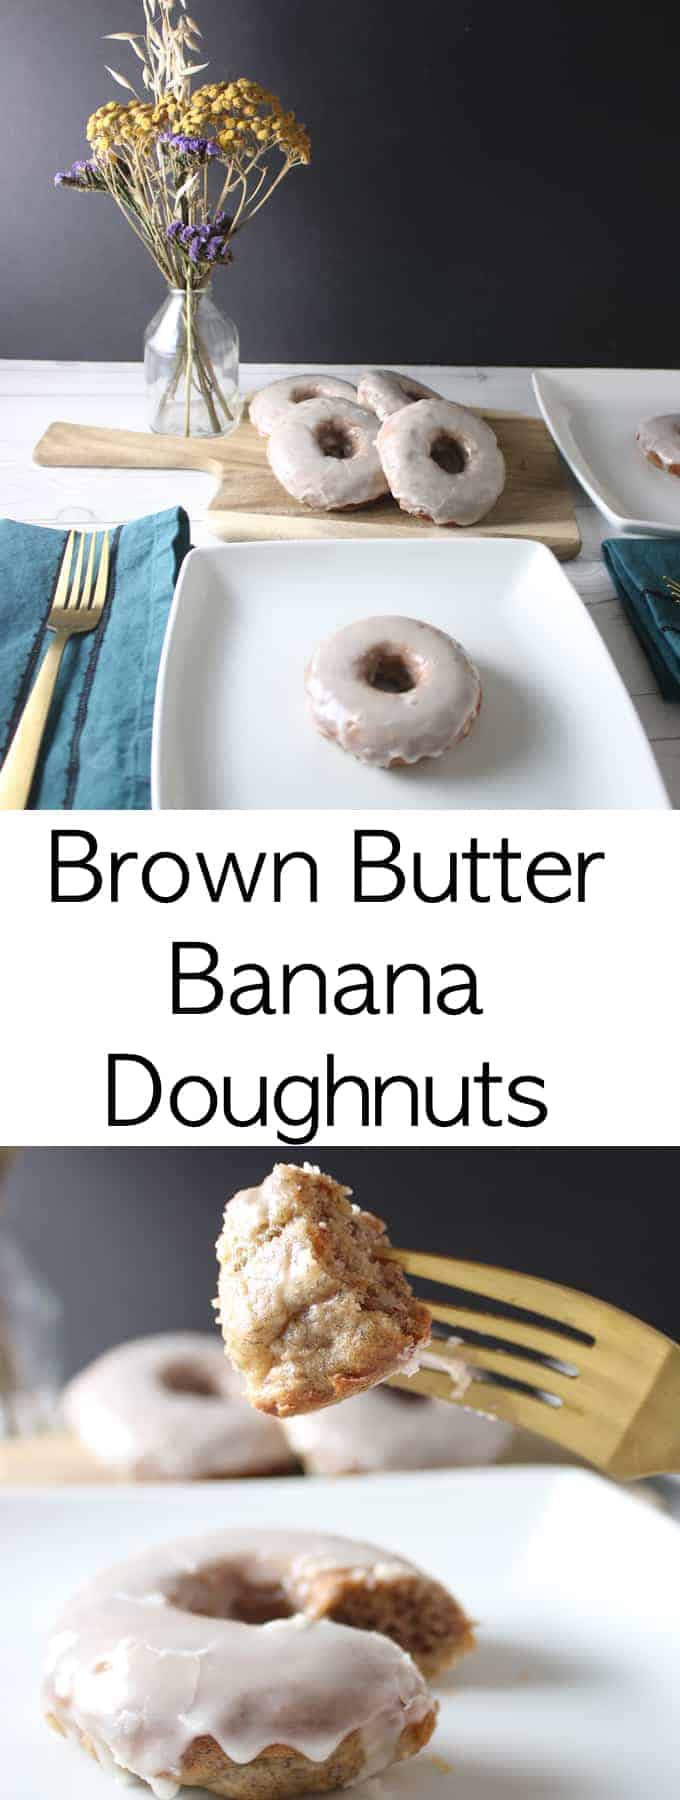 These Brown Butter Banana Doughnuts are so good filled with nutty brown butter, bananas, warm spices, and a sweet glaze!